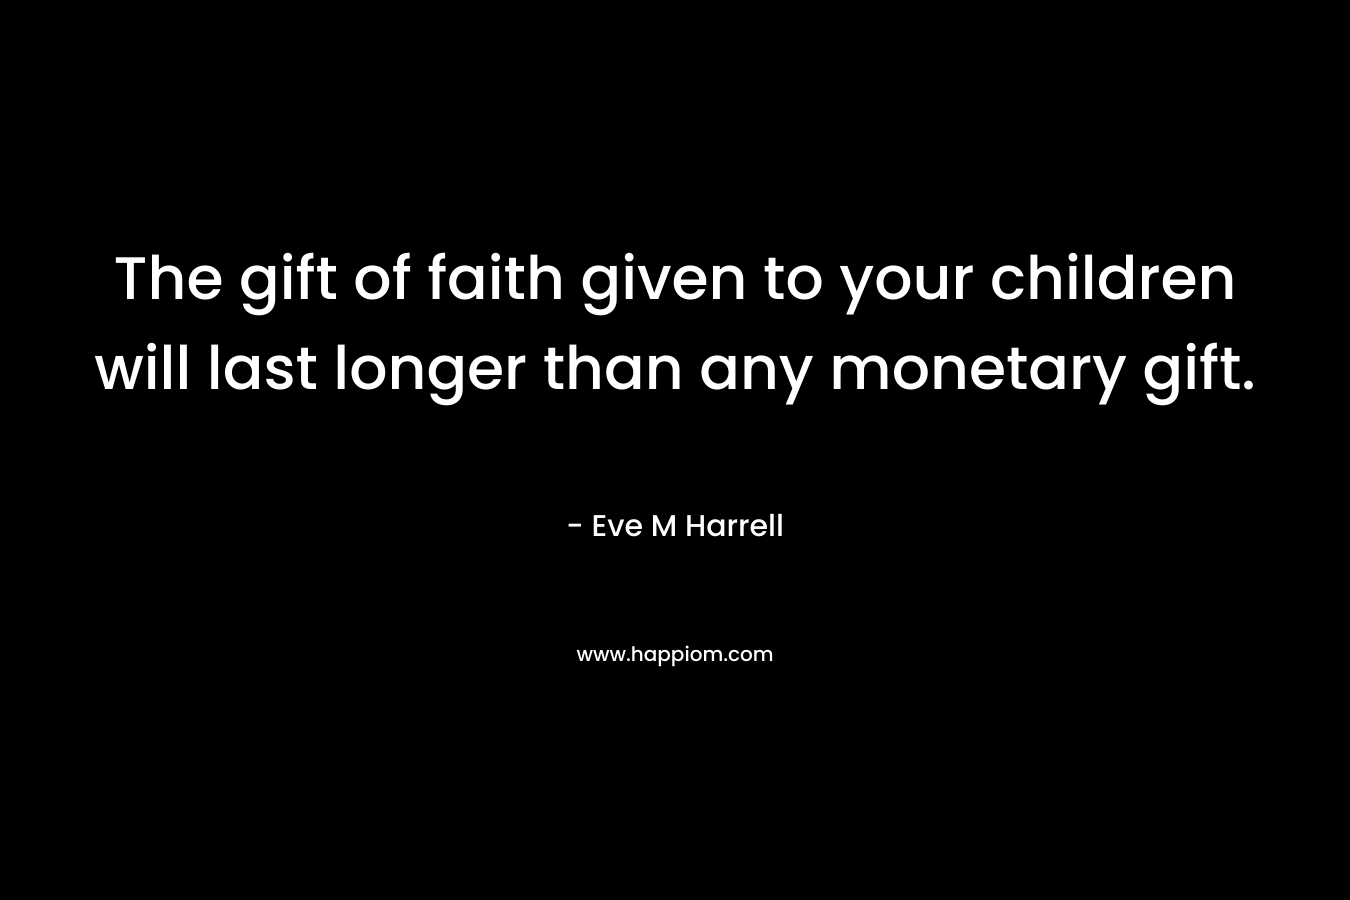 The gift of faith given to your children will last longer than any monetary gift.